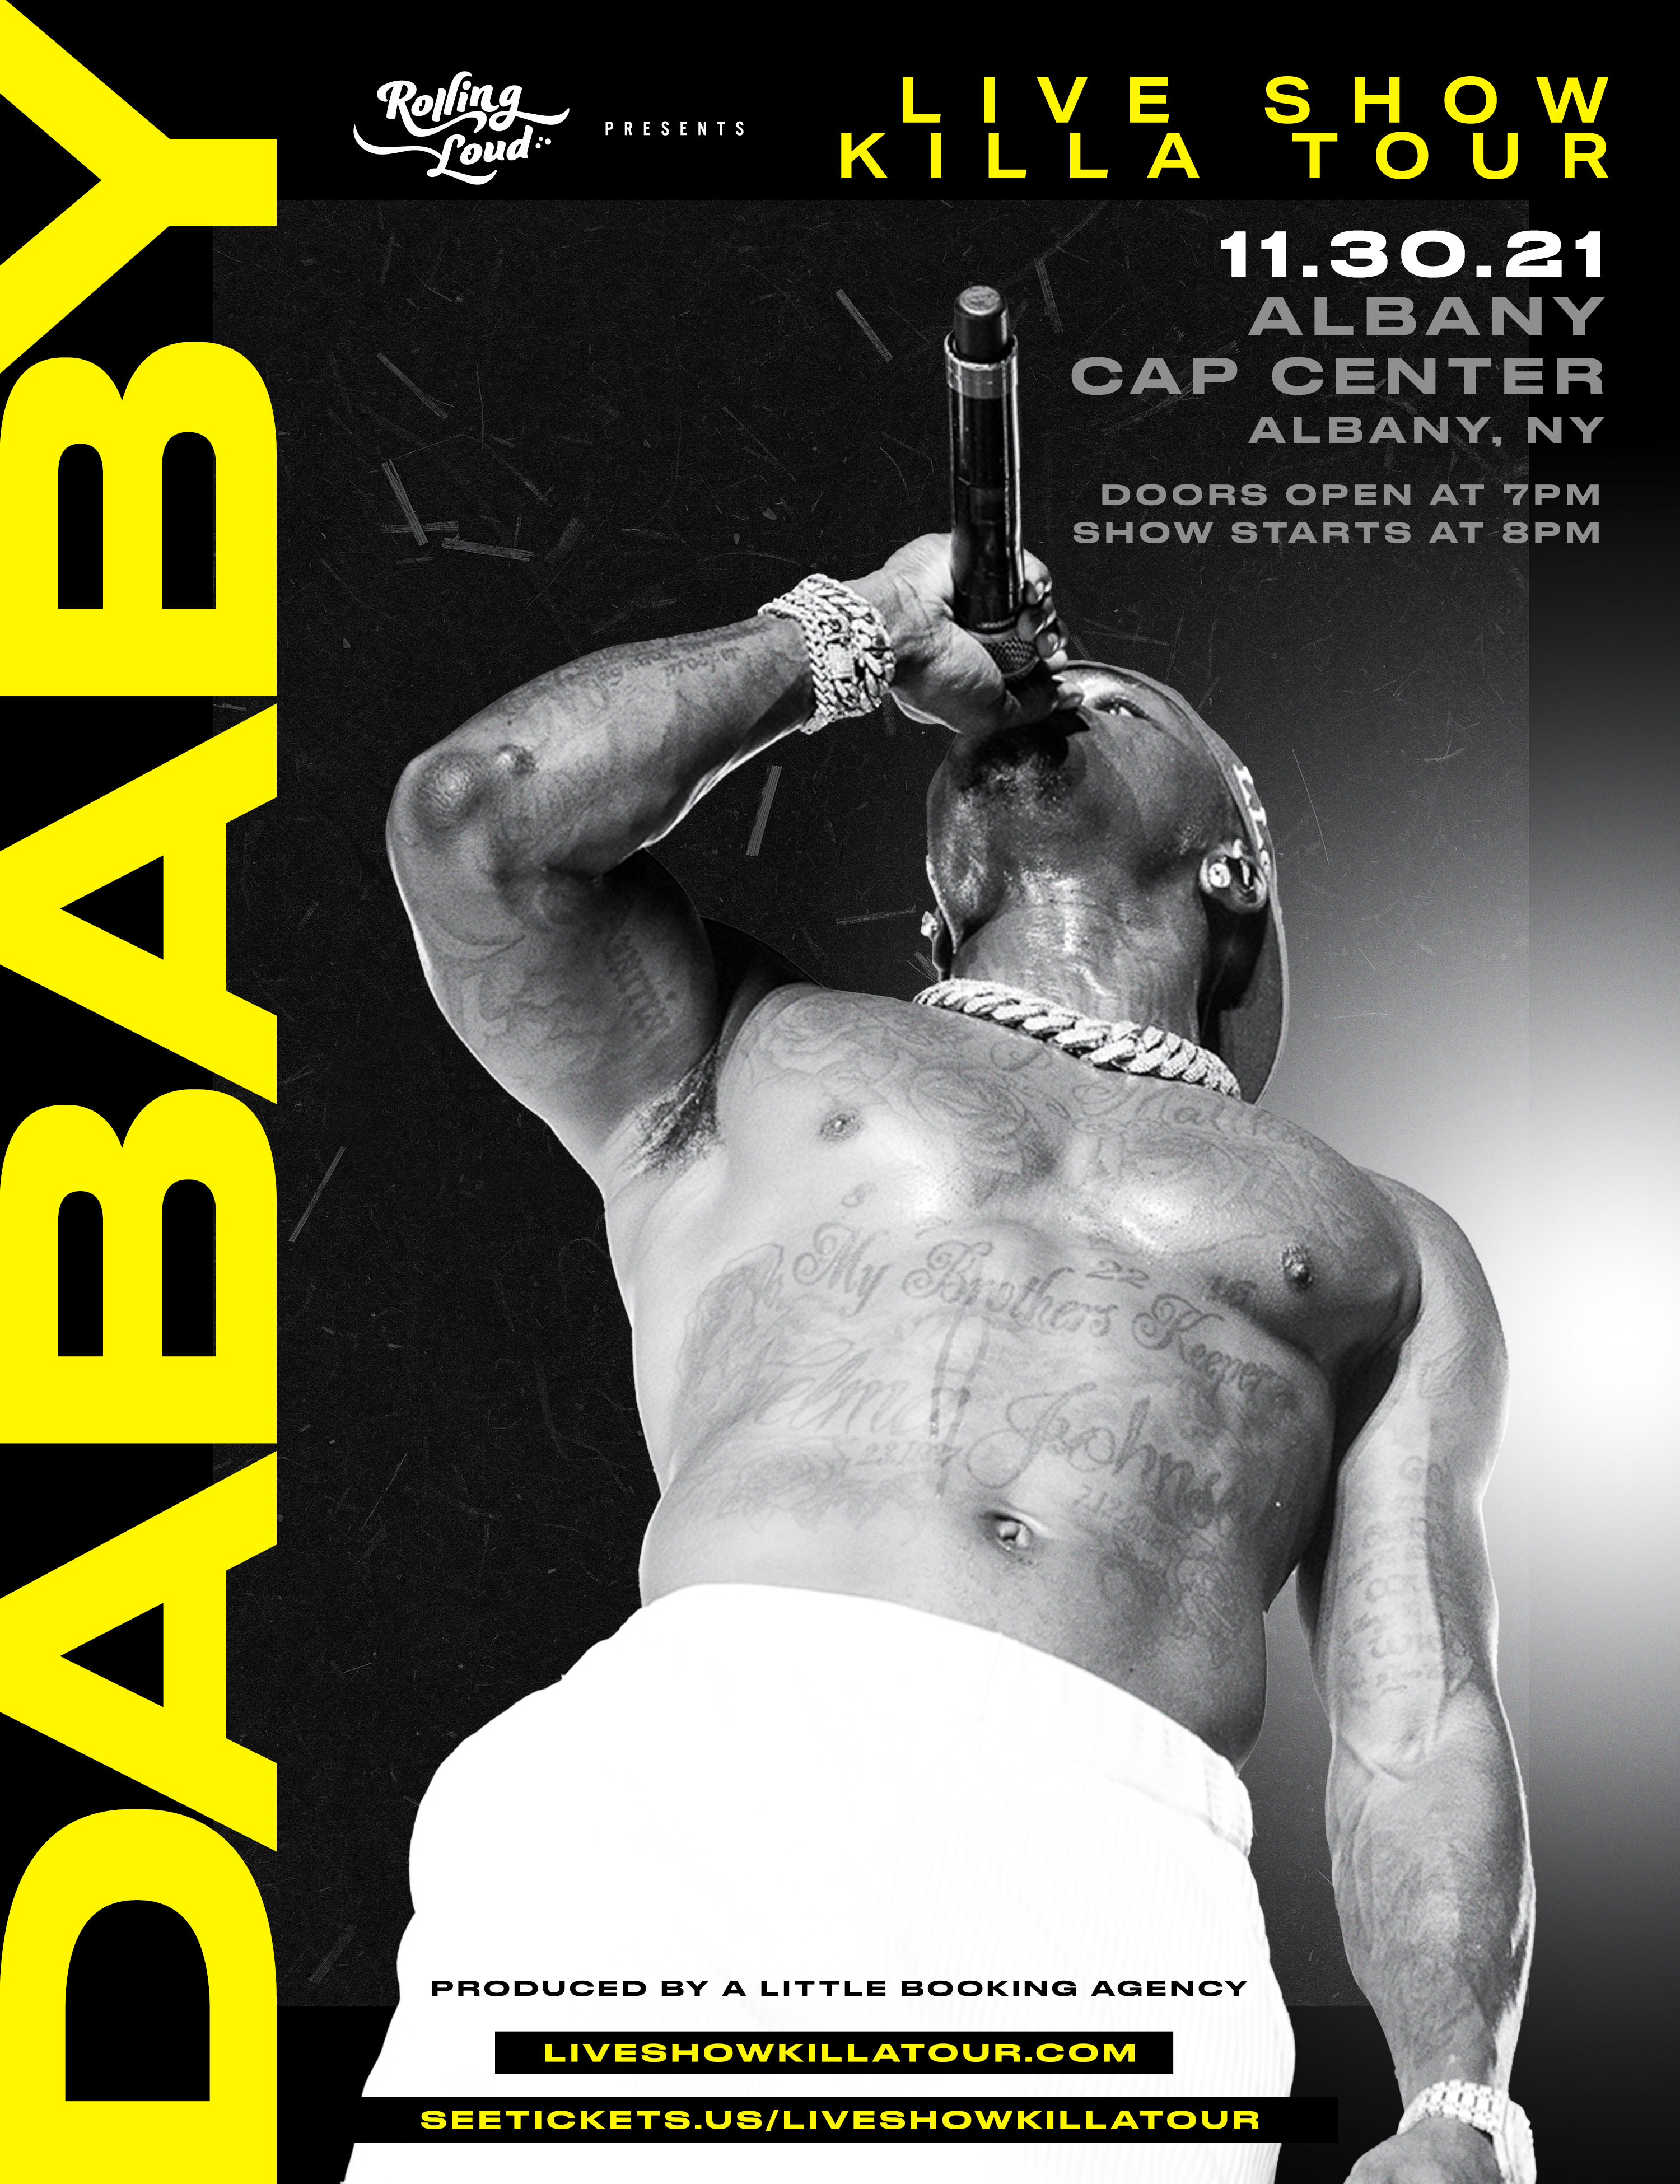 dababy will be refereed to as dadownbad (or dadownbadbaby